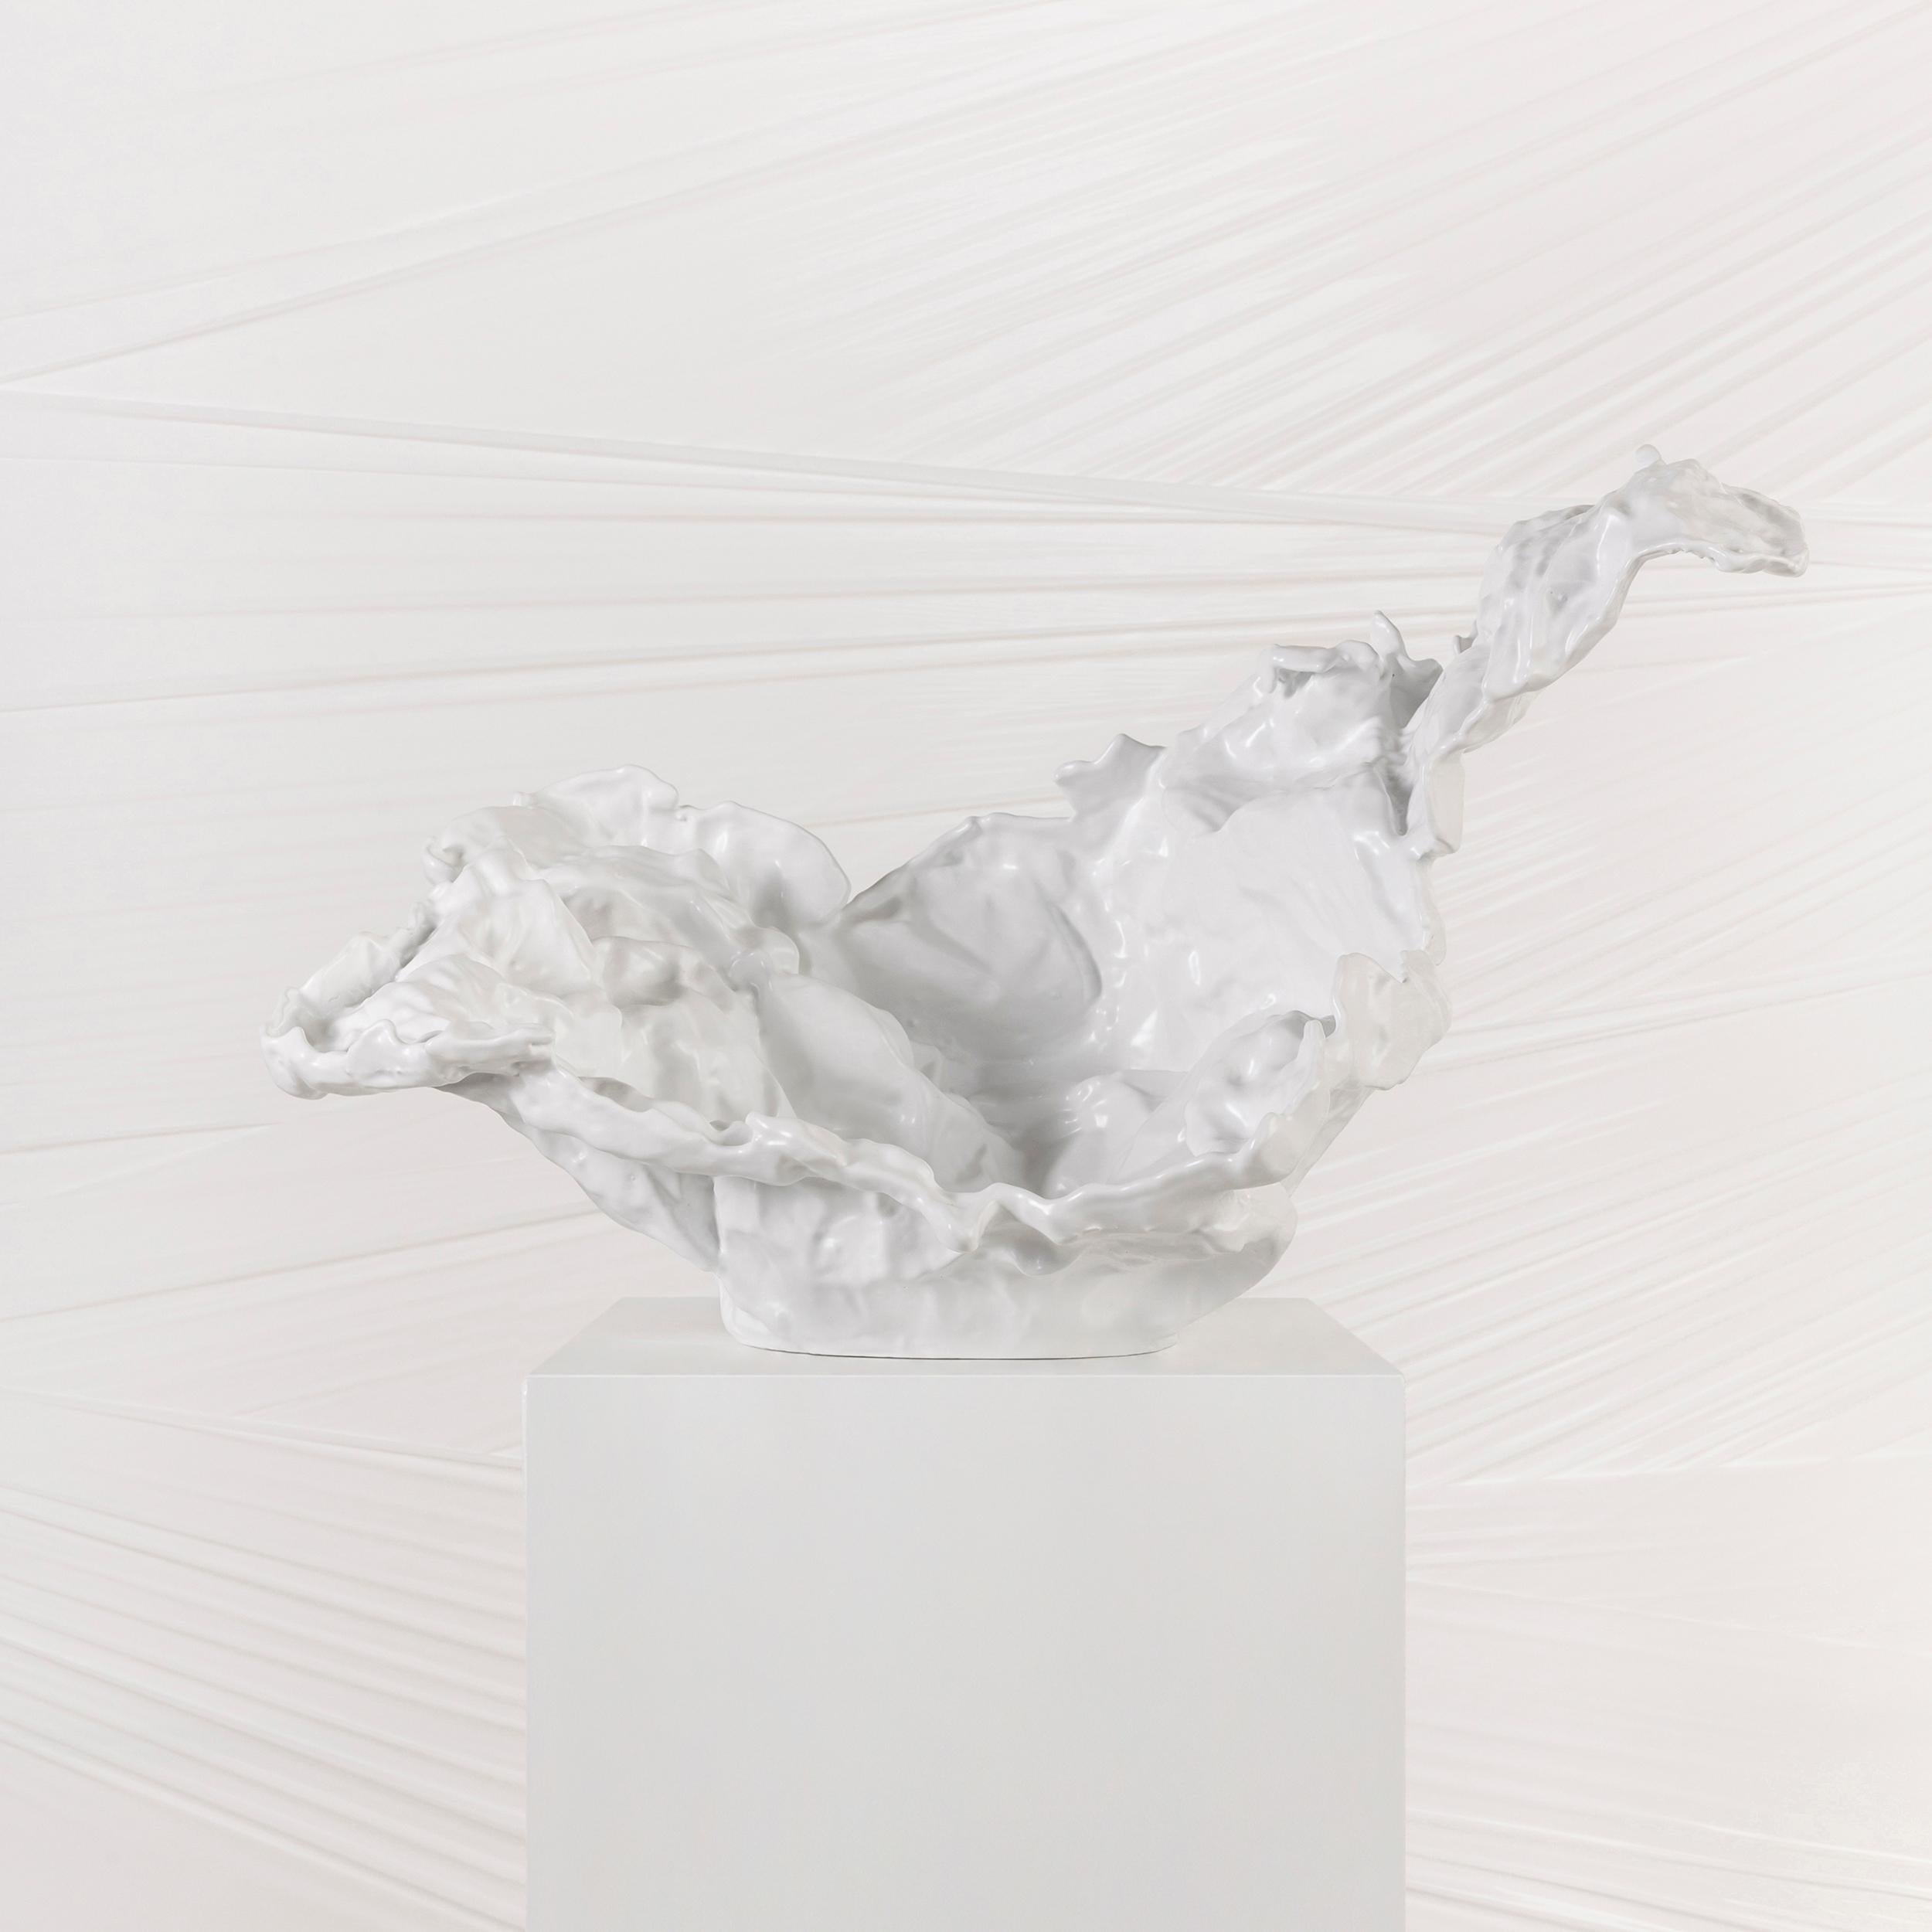 White bowl is made based on innovative, modern digital technology and deep knowledge of the craft.

The artist in the creative process and in the structures of objects uses the forms of foil prints, which he randomly finds and imprints in the city